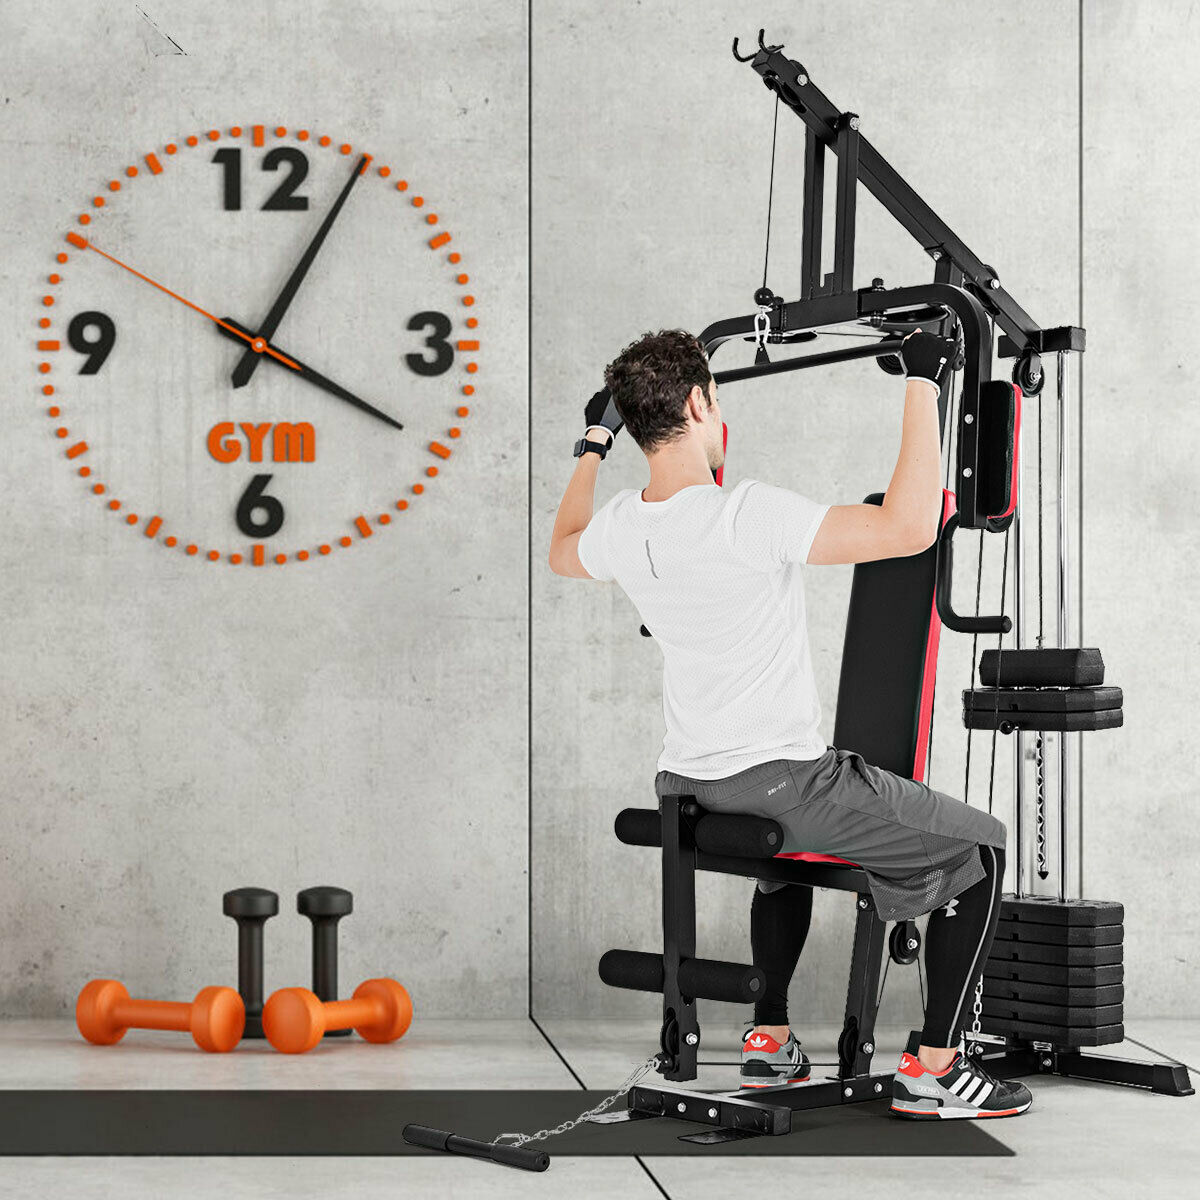 Costway Multifunction Cross Trainer Workout Machine Strength Training Fitness Exercise - image 3 of 9